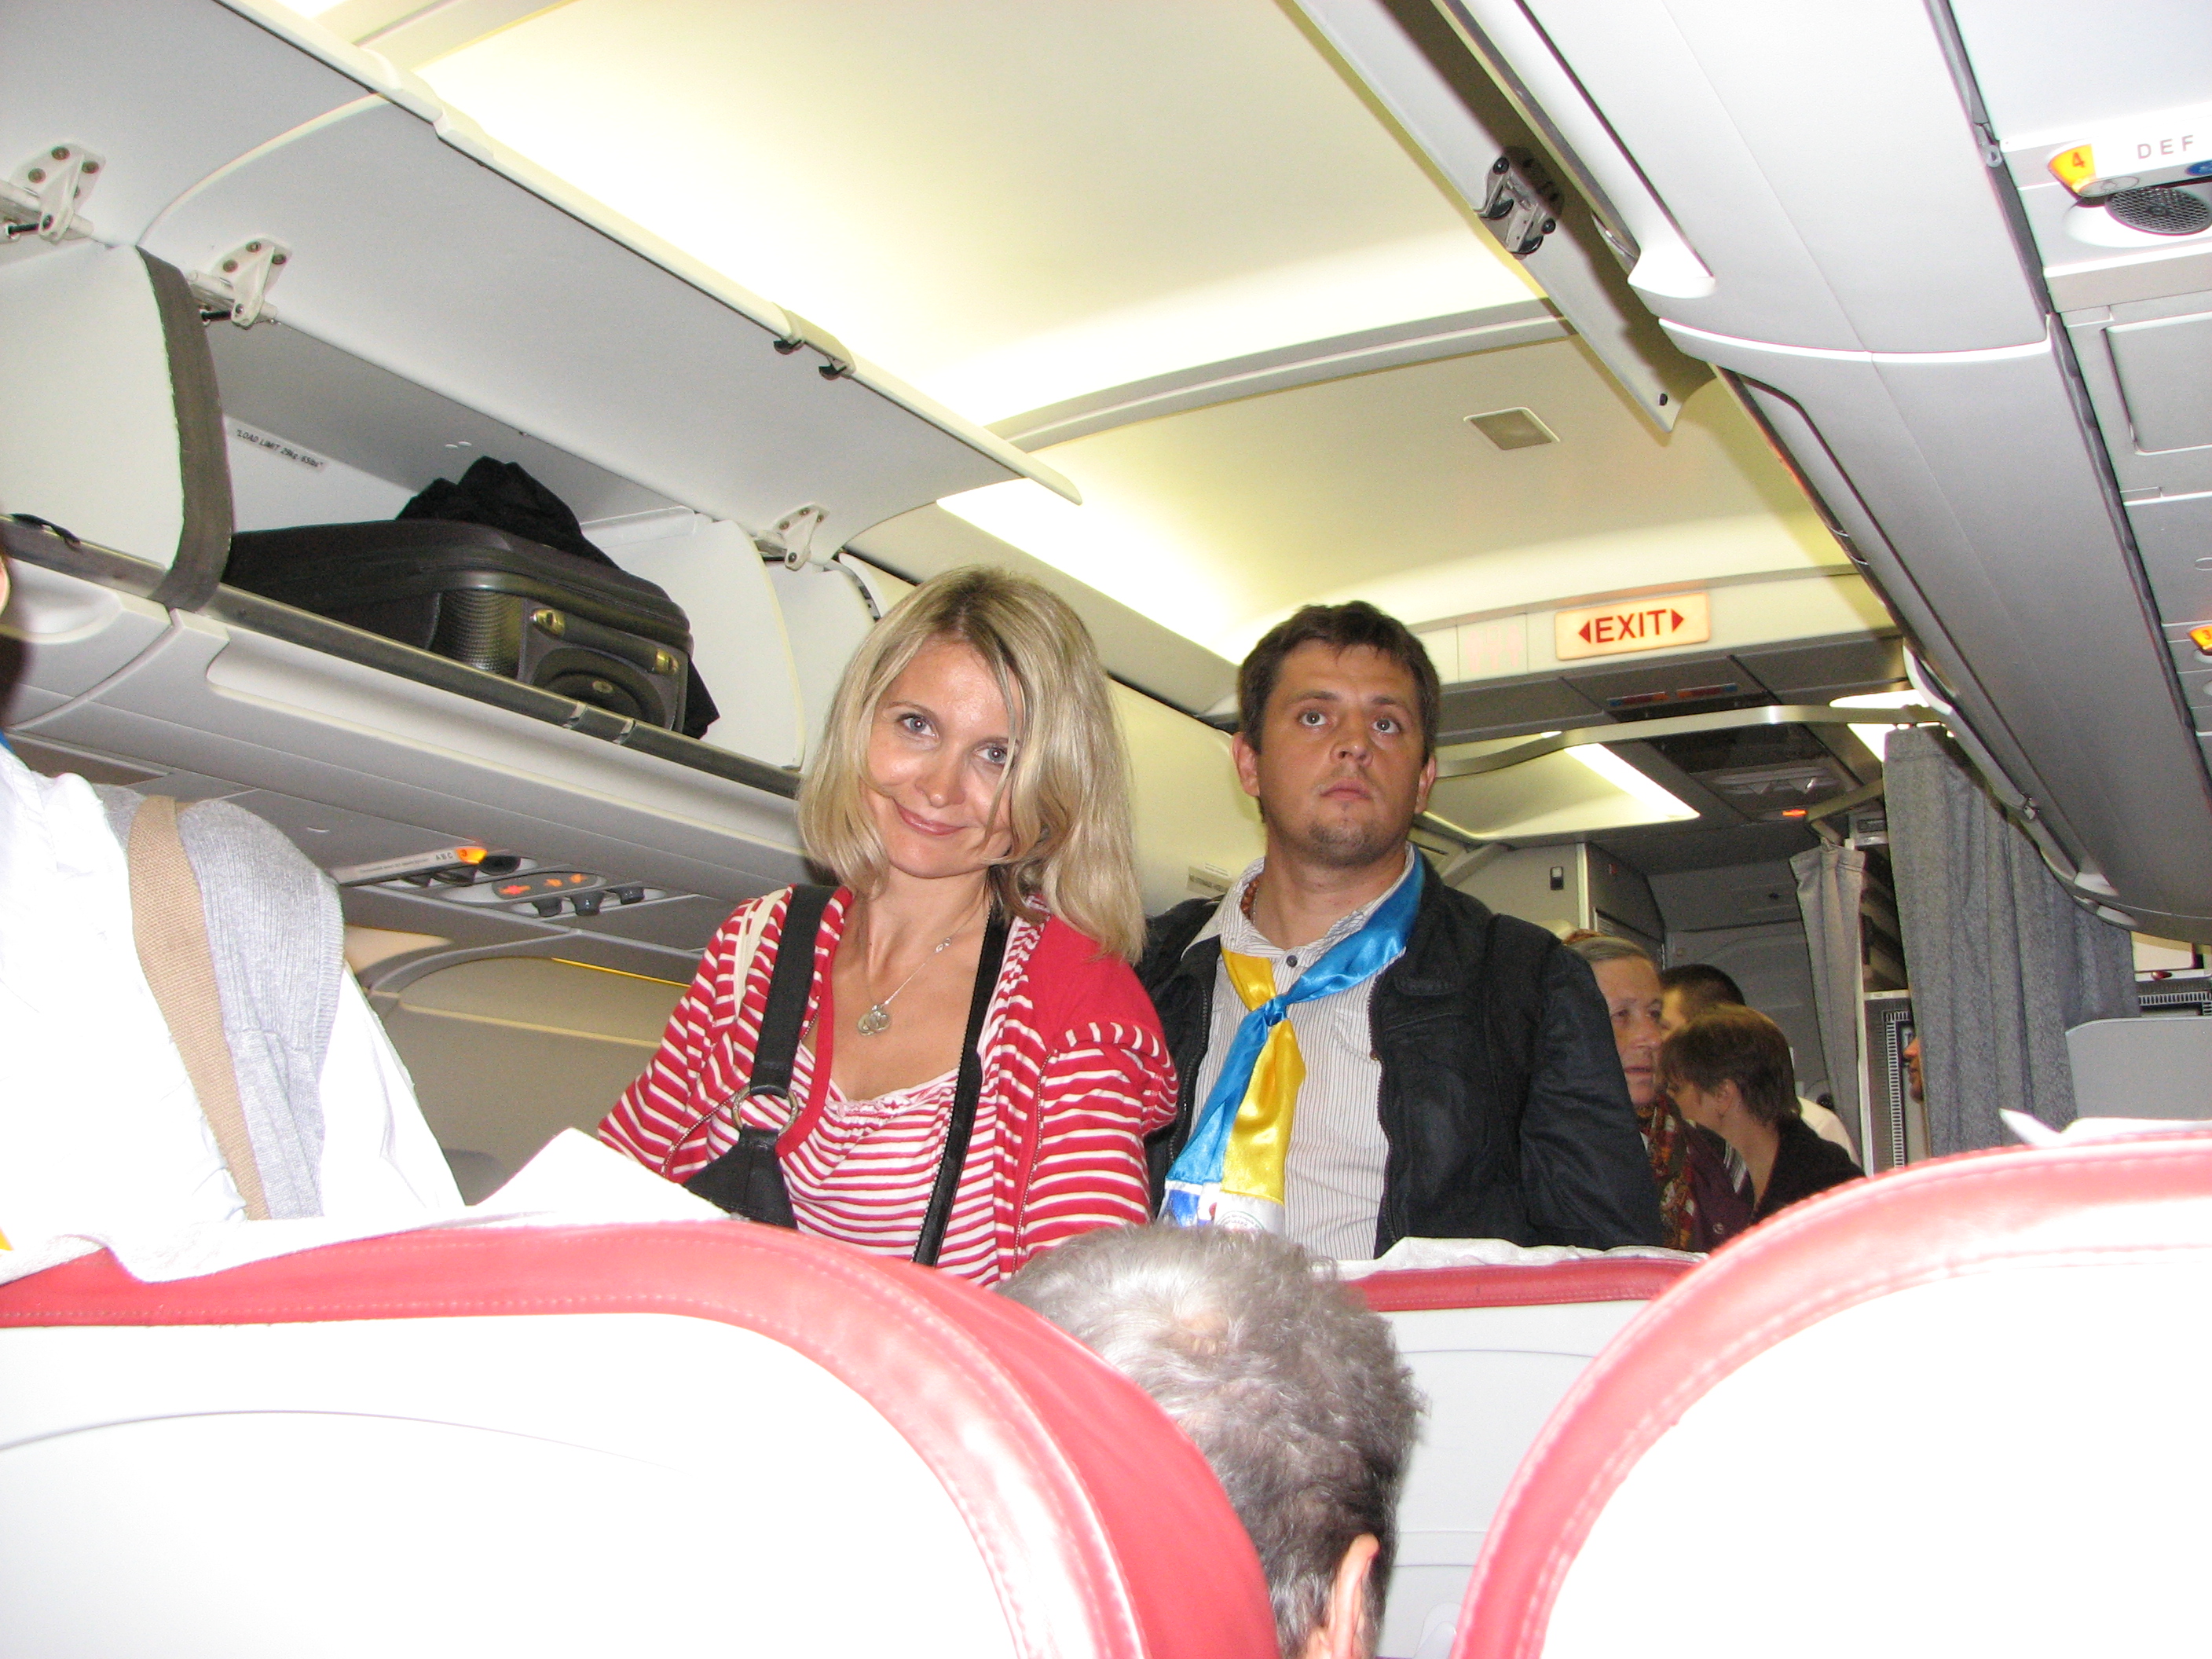 A beautiful Catholic couple - a wife with her husband - during a flight from Tel-Aviv, Israel